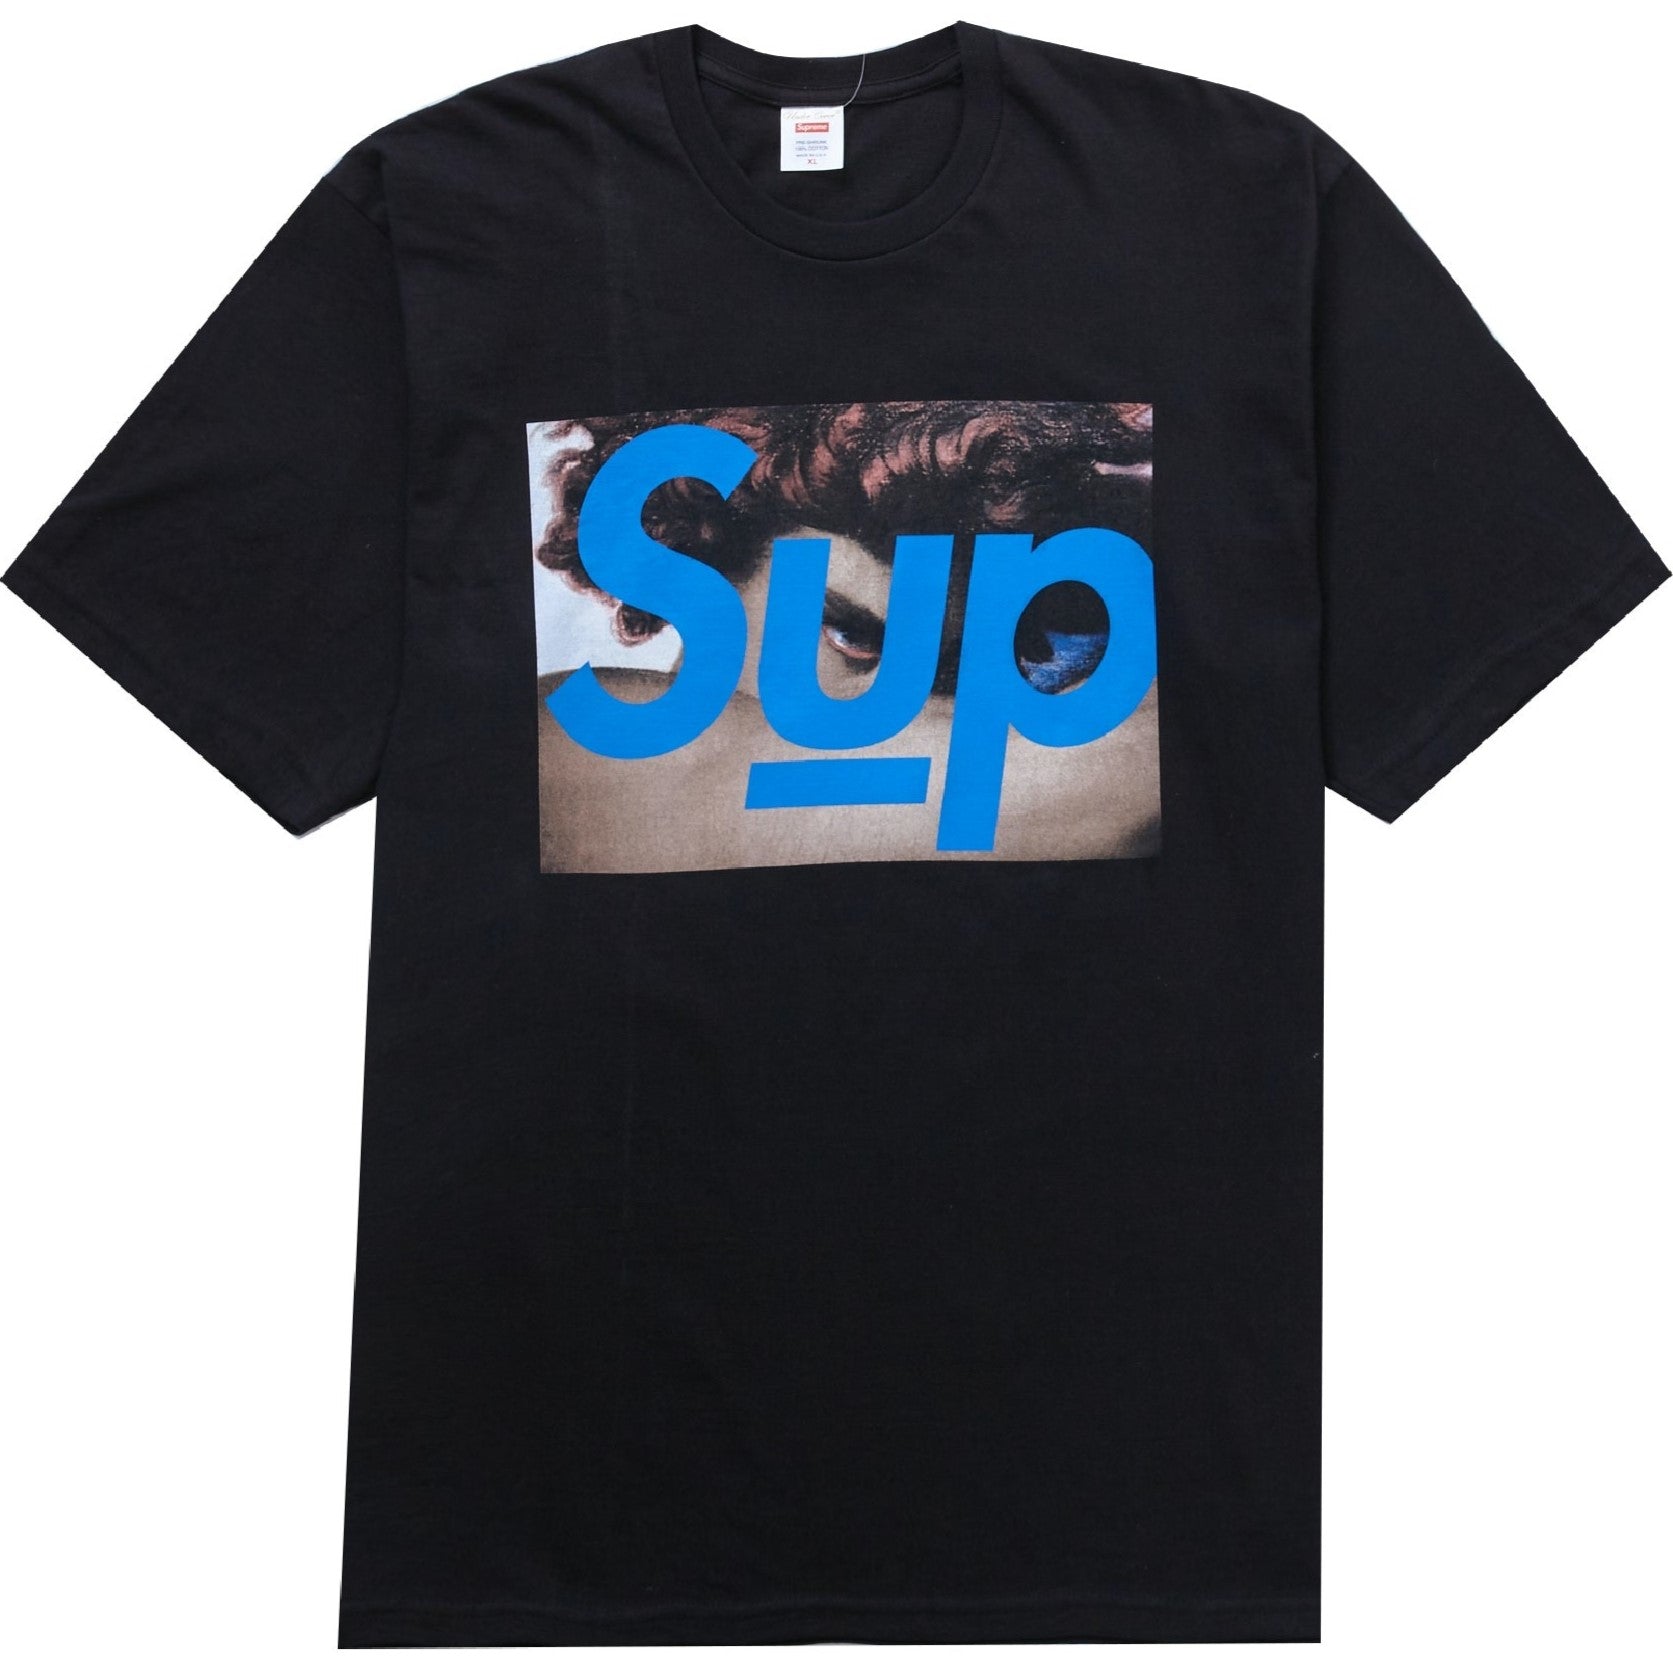 Supreme x UNDERCOVER Face Tee - Black | In stock